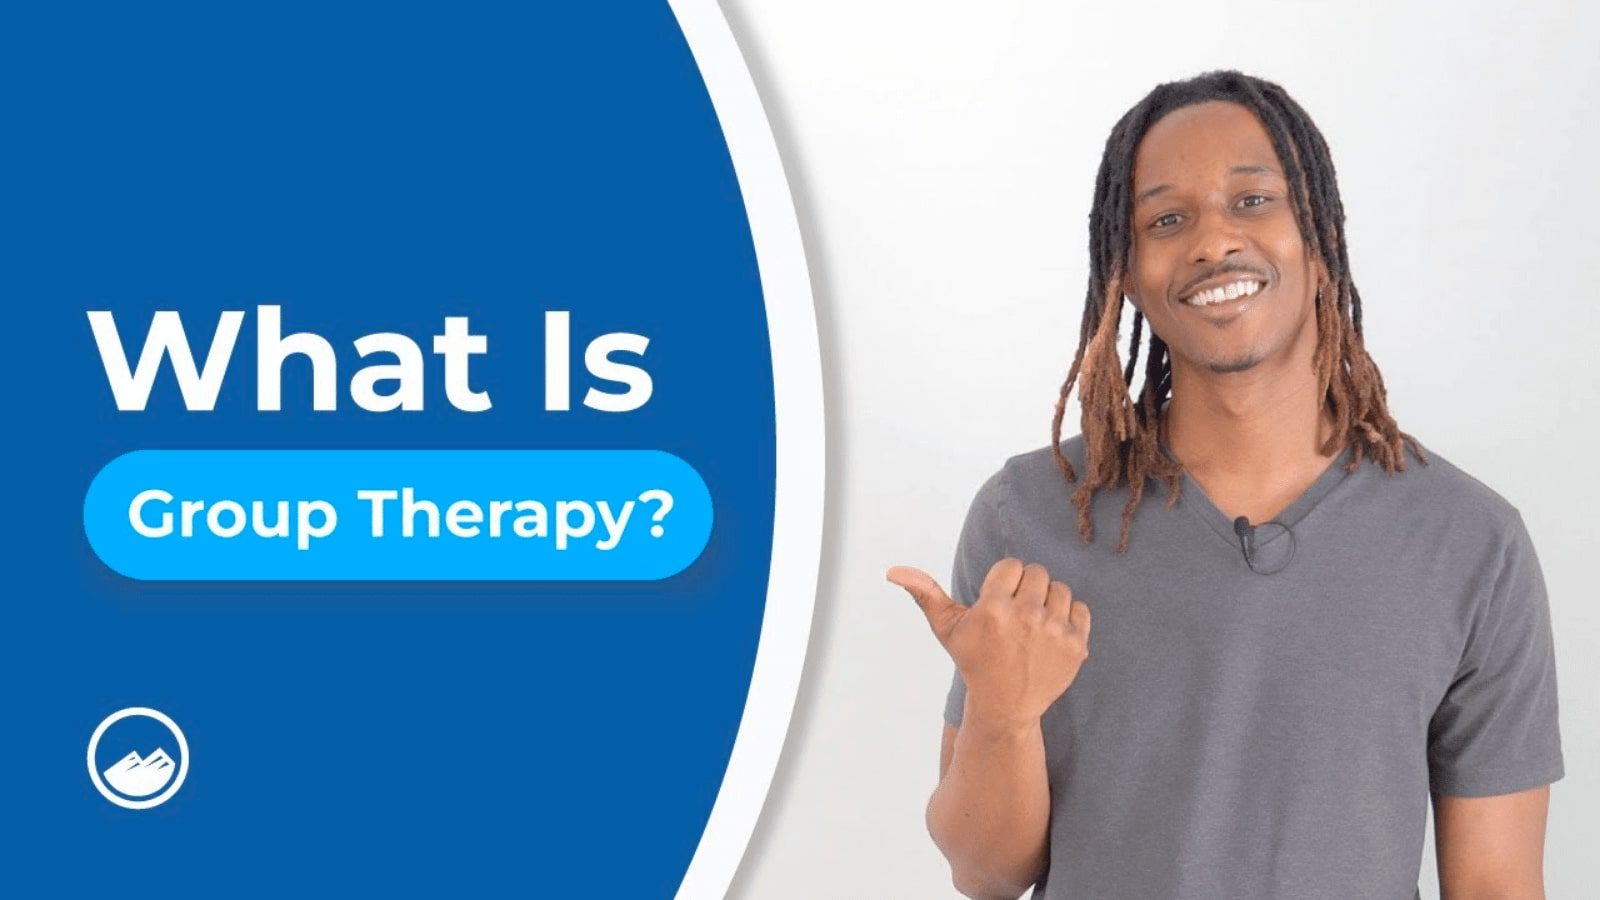 What is group therapy?